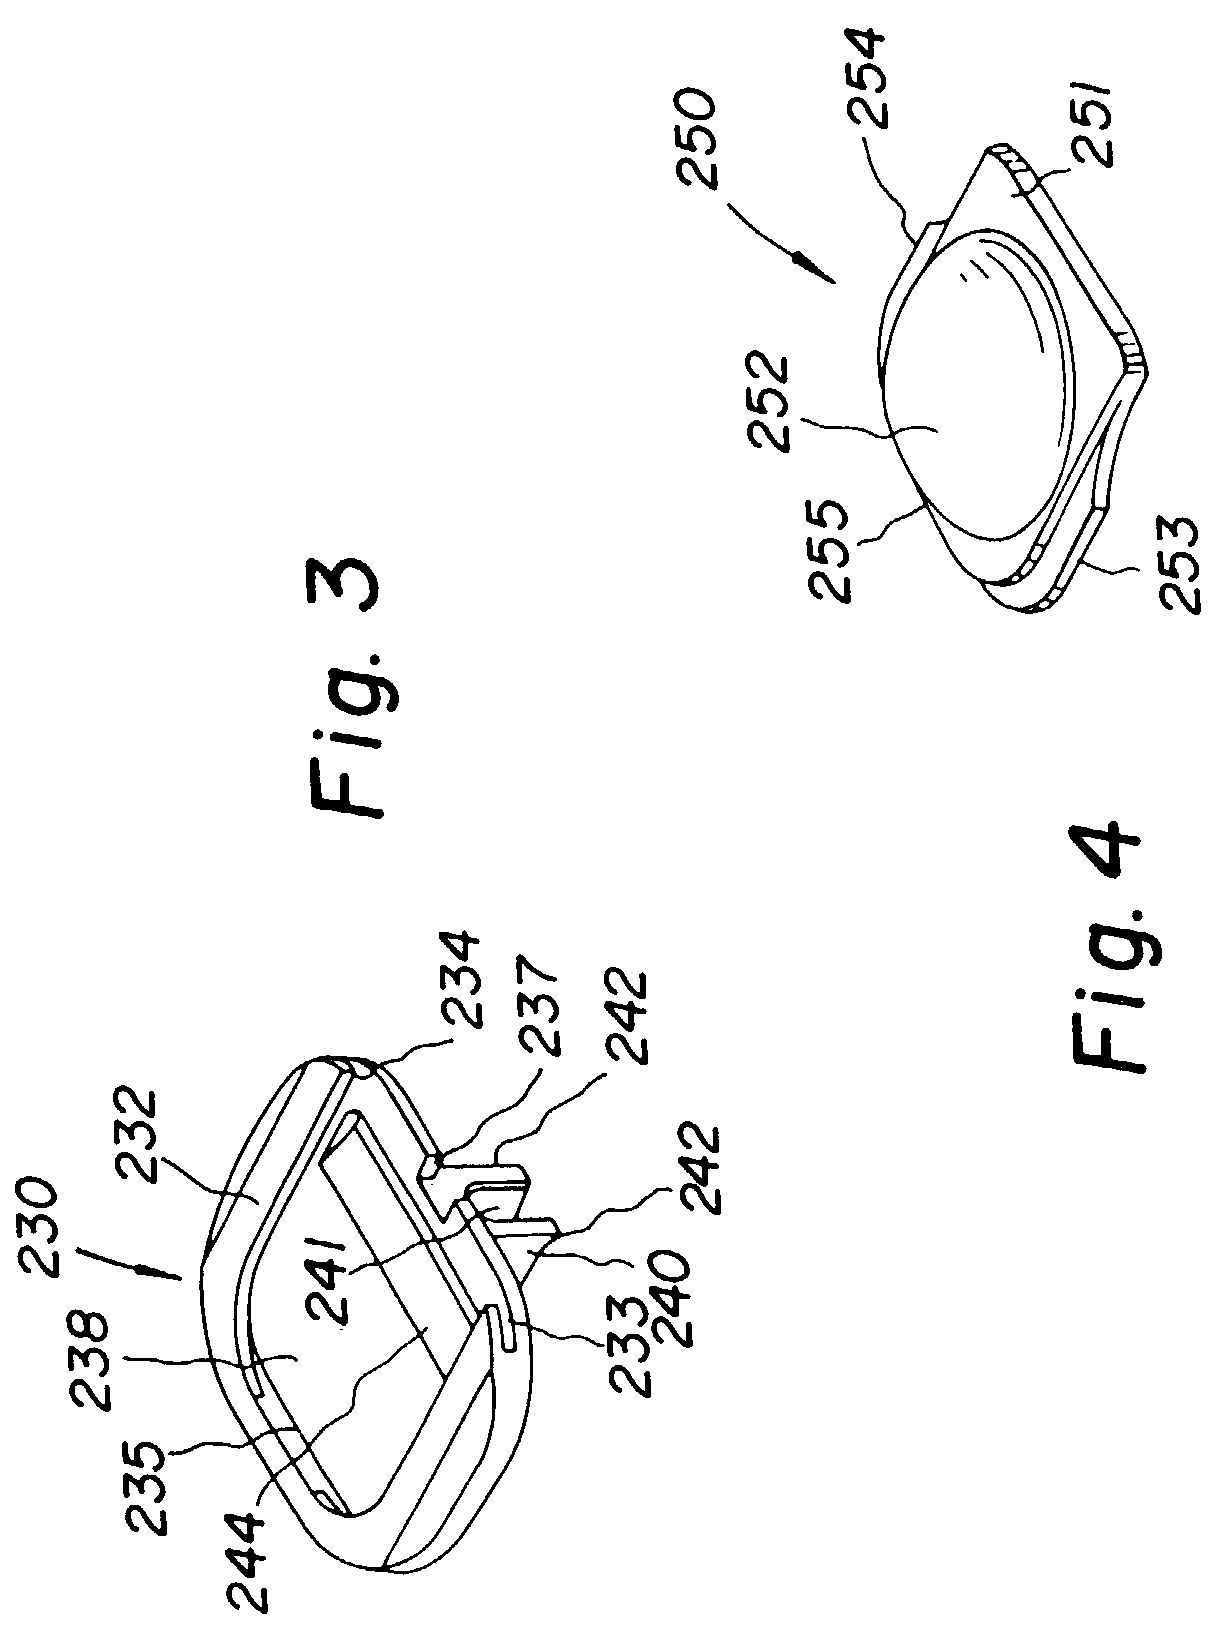 Instruments and method for inserting an intervertebral implant